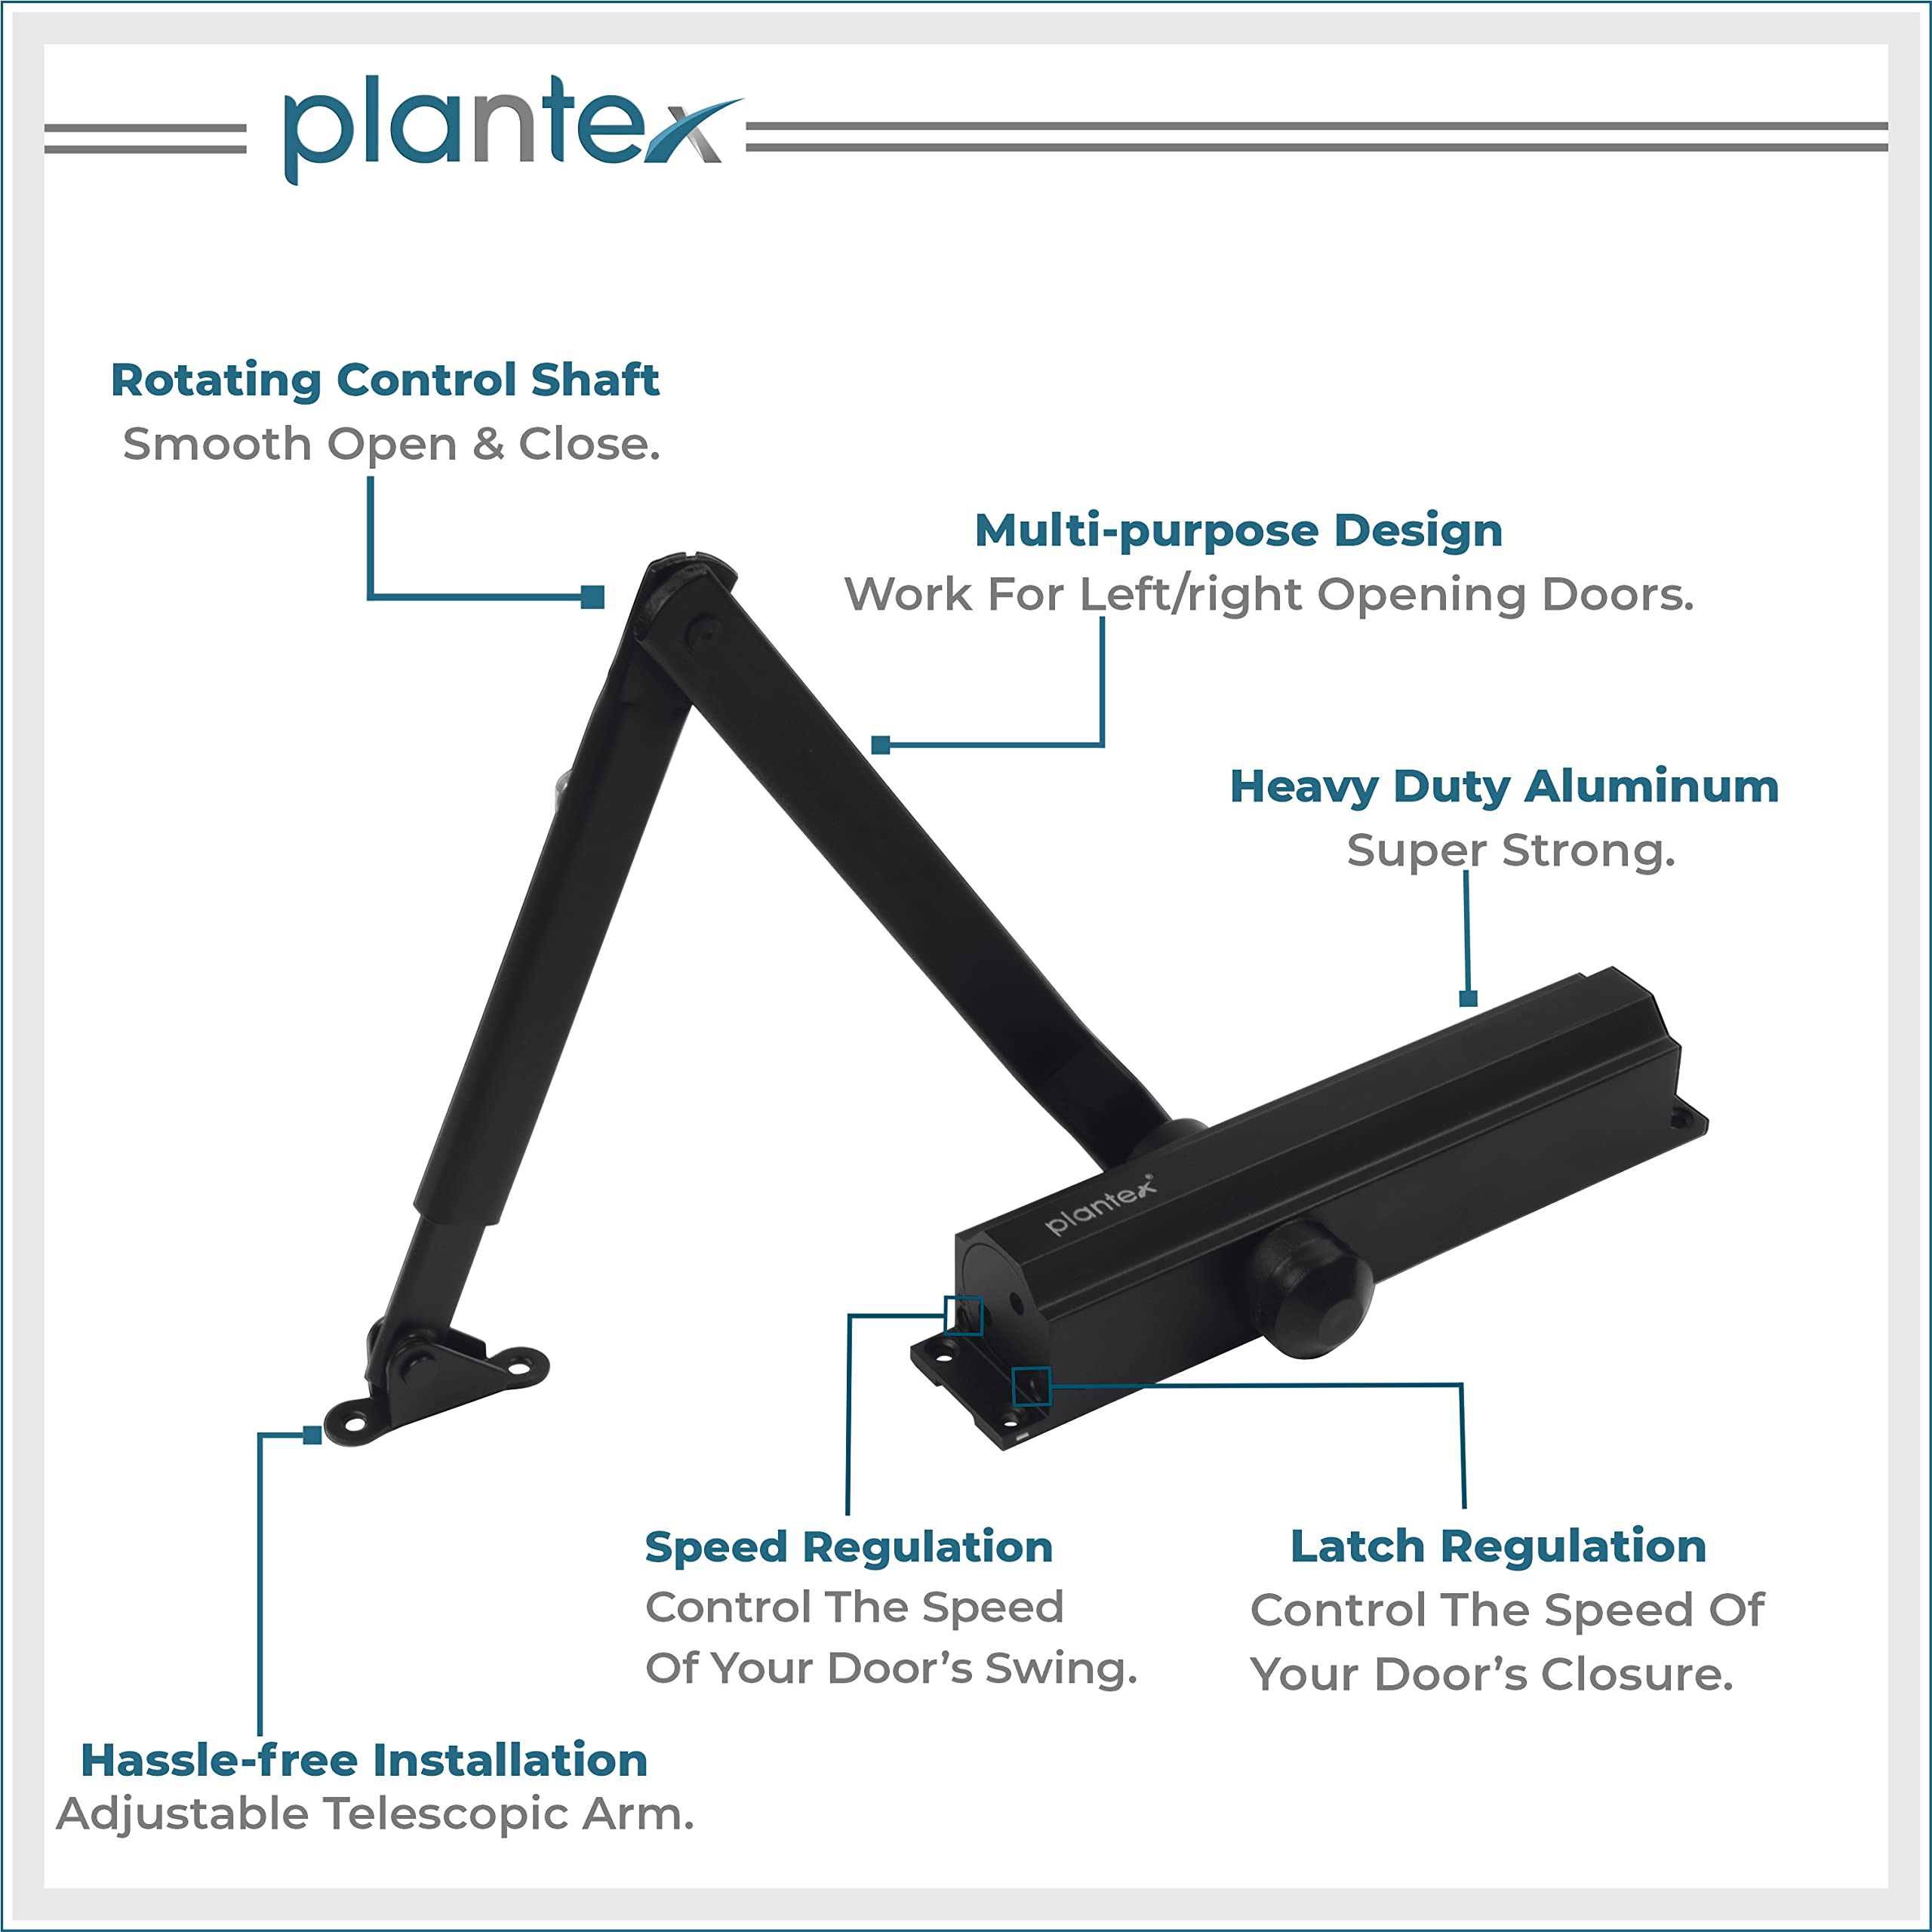 Plantex Premium Automatic Door Closer for All Door Adjustable Size 3 Spring Hydraulic Auto Door Closer for Home Office Hotel for Wide 180 Degree Opening (ISO 9001 Certified) (Capacity-75,Black)